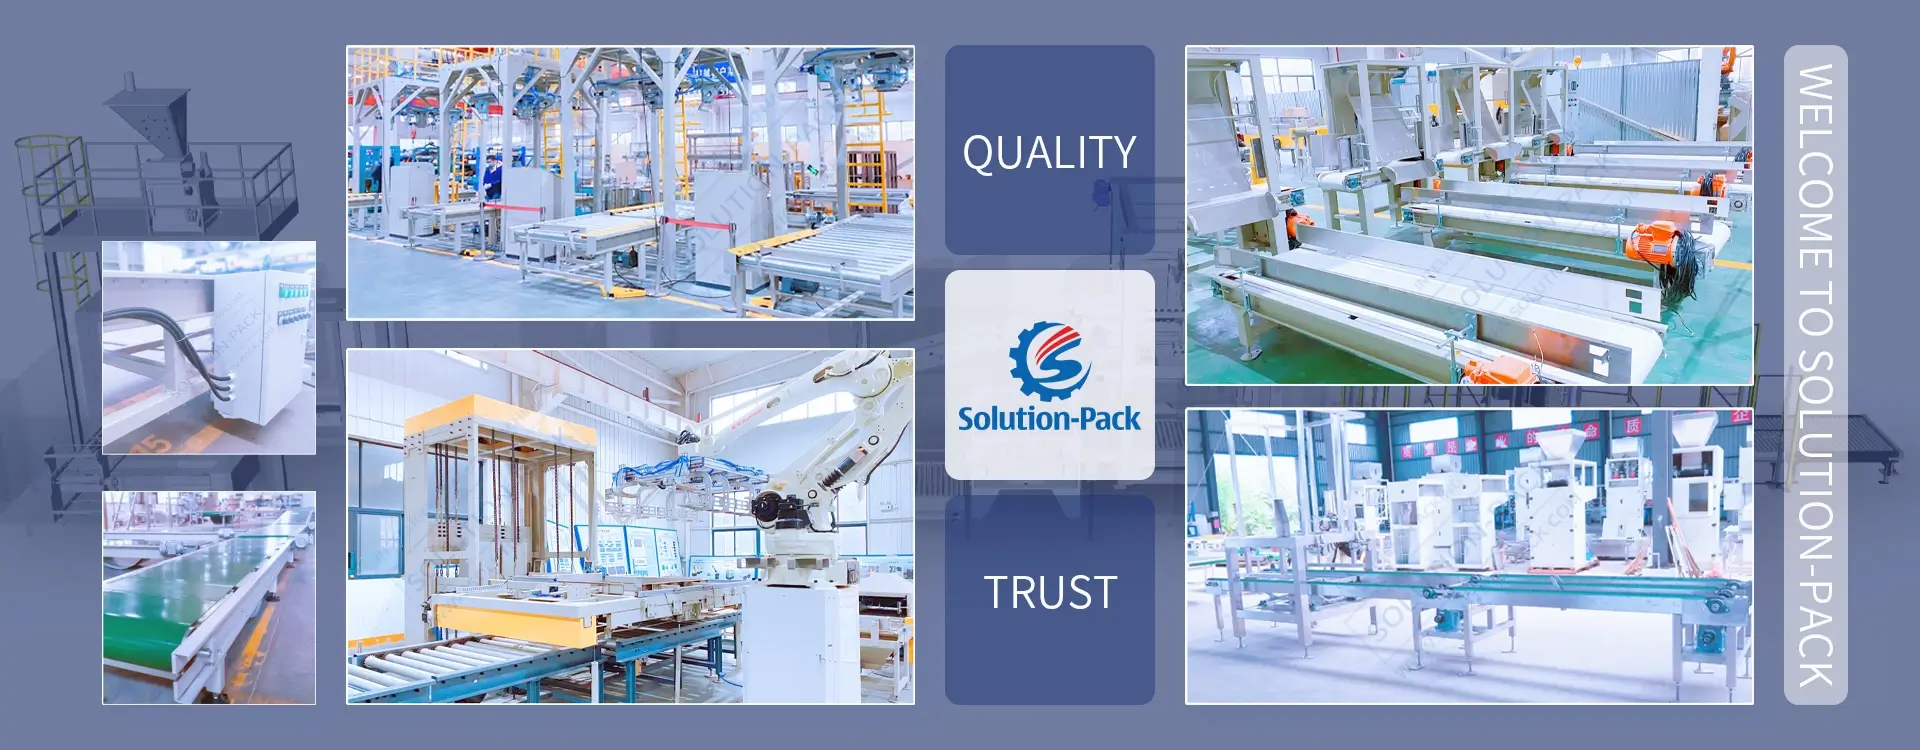 Model HZ5B Semi-Automatic Manual Bagging Machine Equipment Middle Banner Picture | Solution-Pack